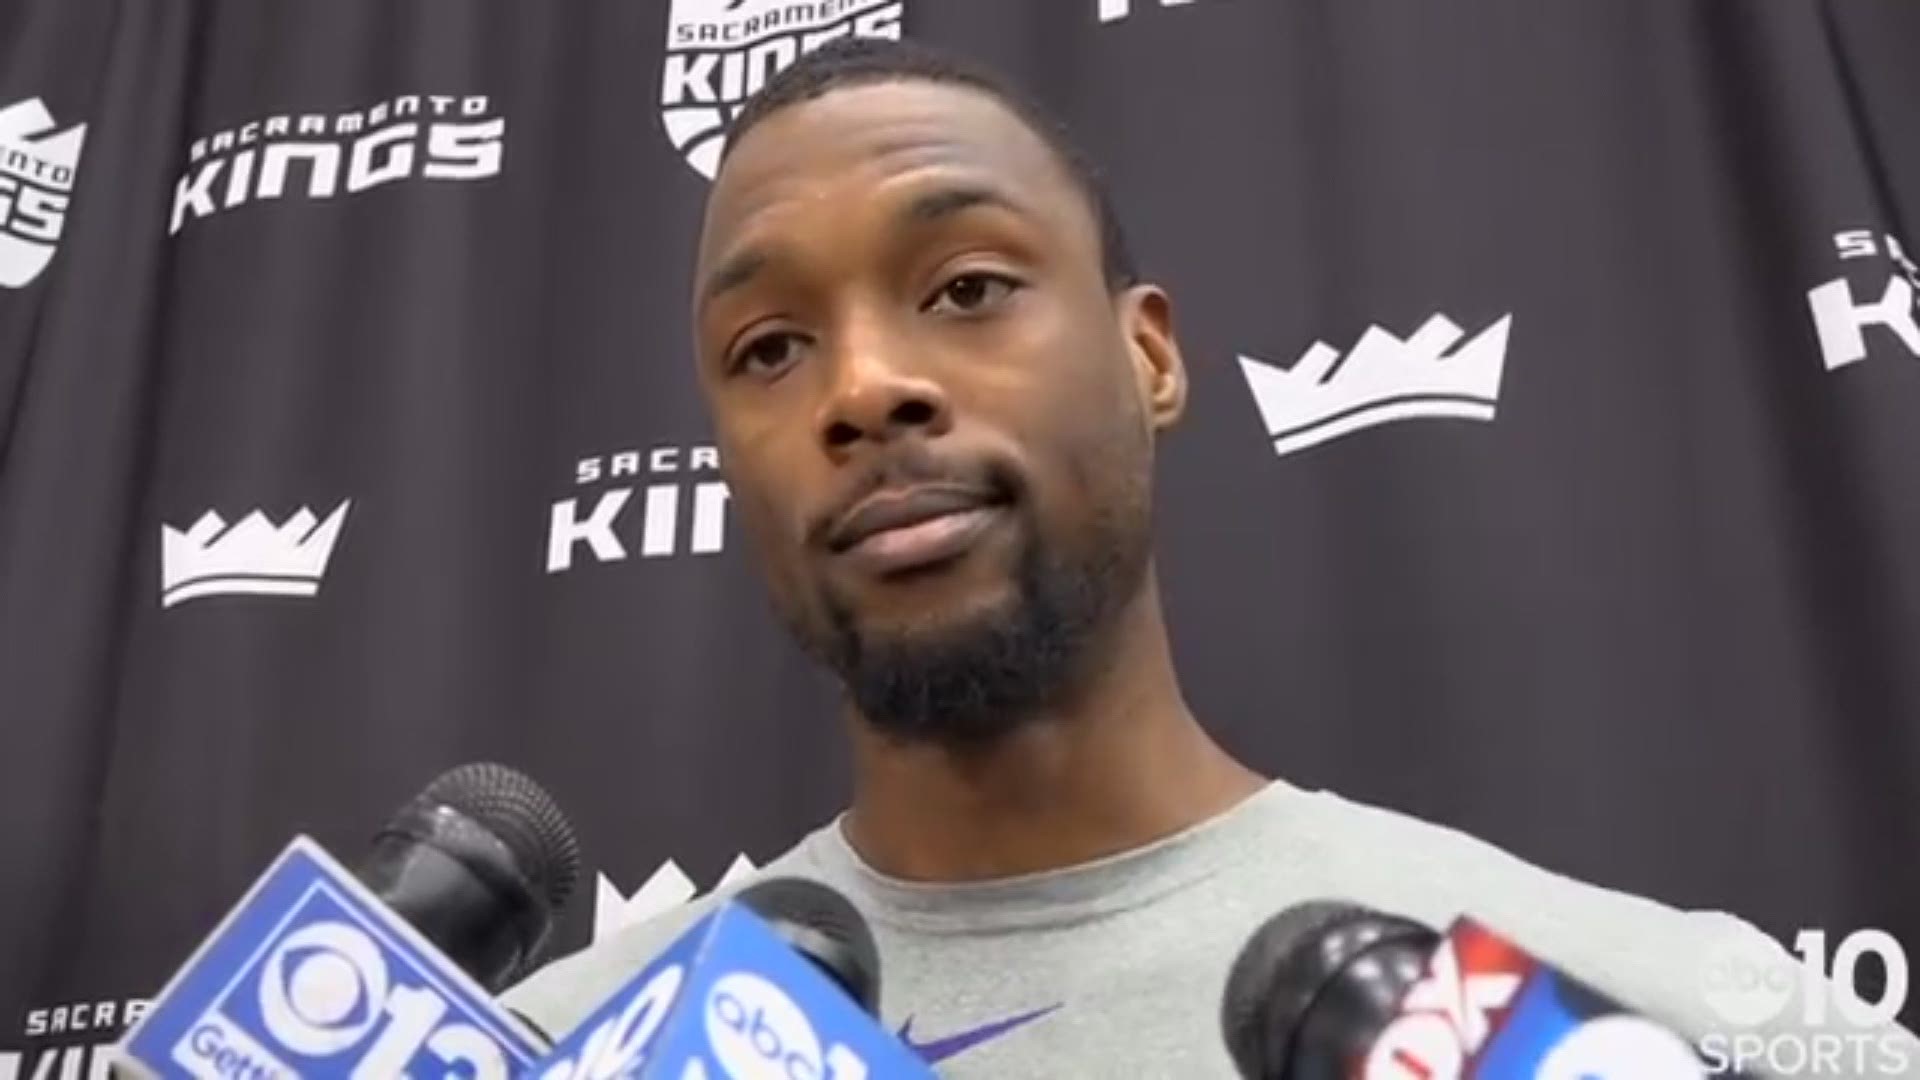 Kings forward Harrison Barnes talks about how the team will learn and move on from that loss to the Brooklyn Nets on Tuesday, and looks ahead to Thursday, when he will face his former Mavericks team for the first time, and what it was like to be a teammate with Dirk Nowitzki.